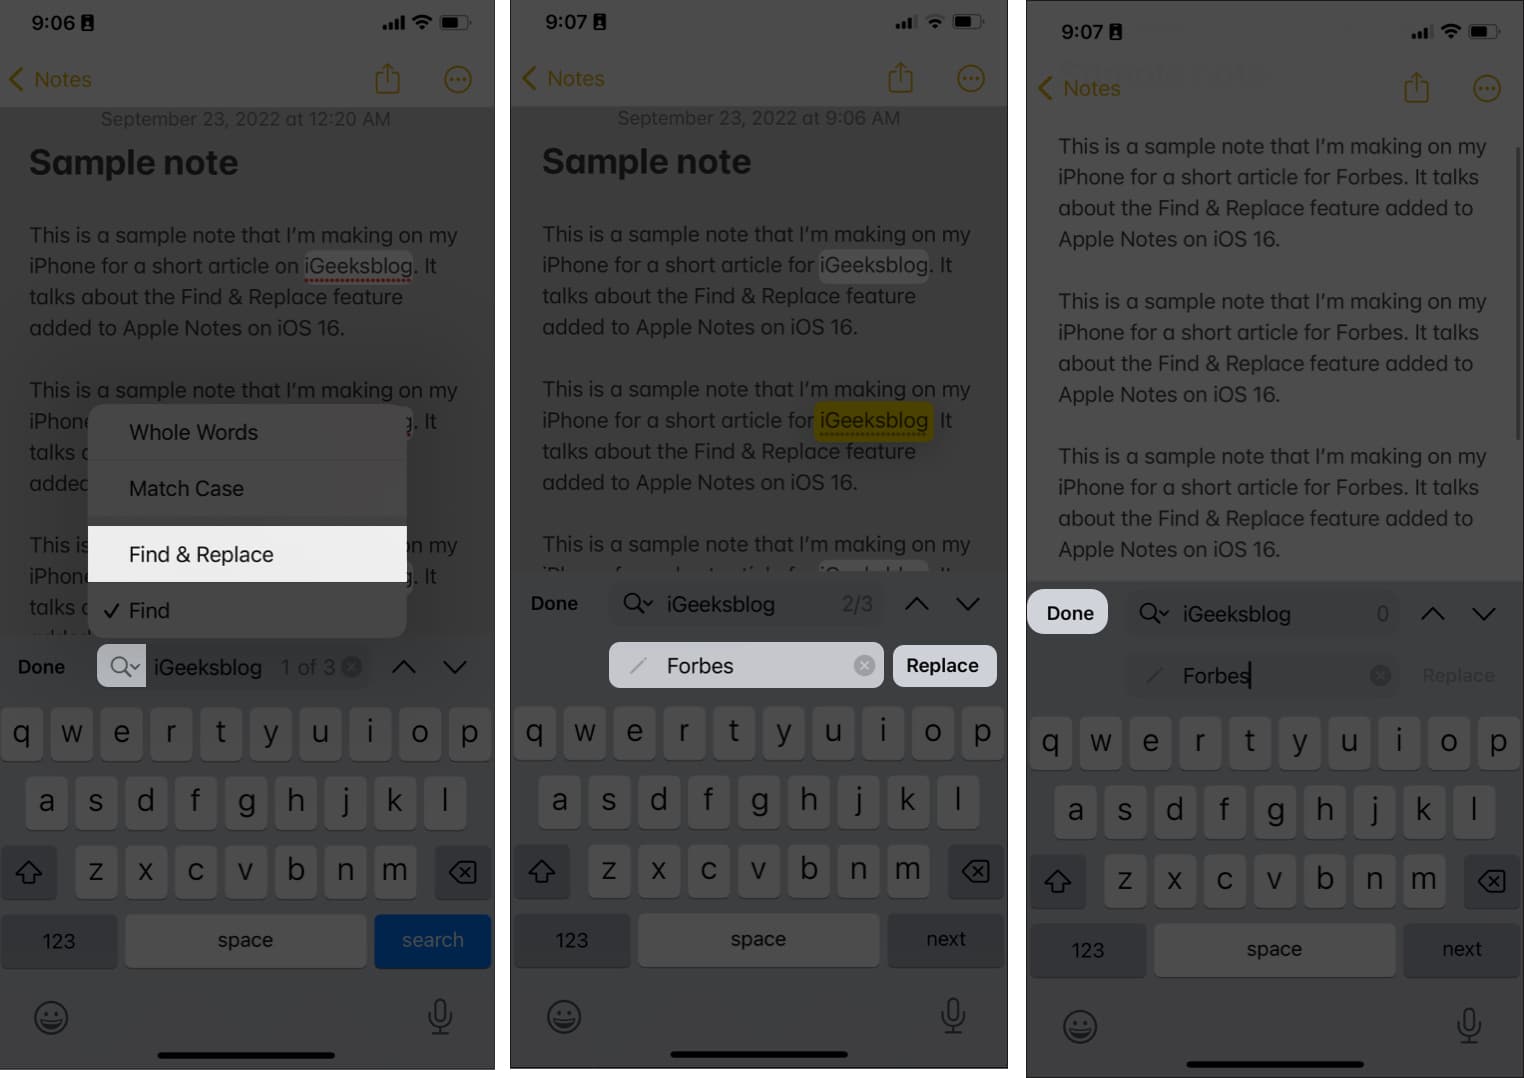 Tap Done to find and replace texxt in Notes app on iPhone